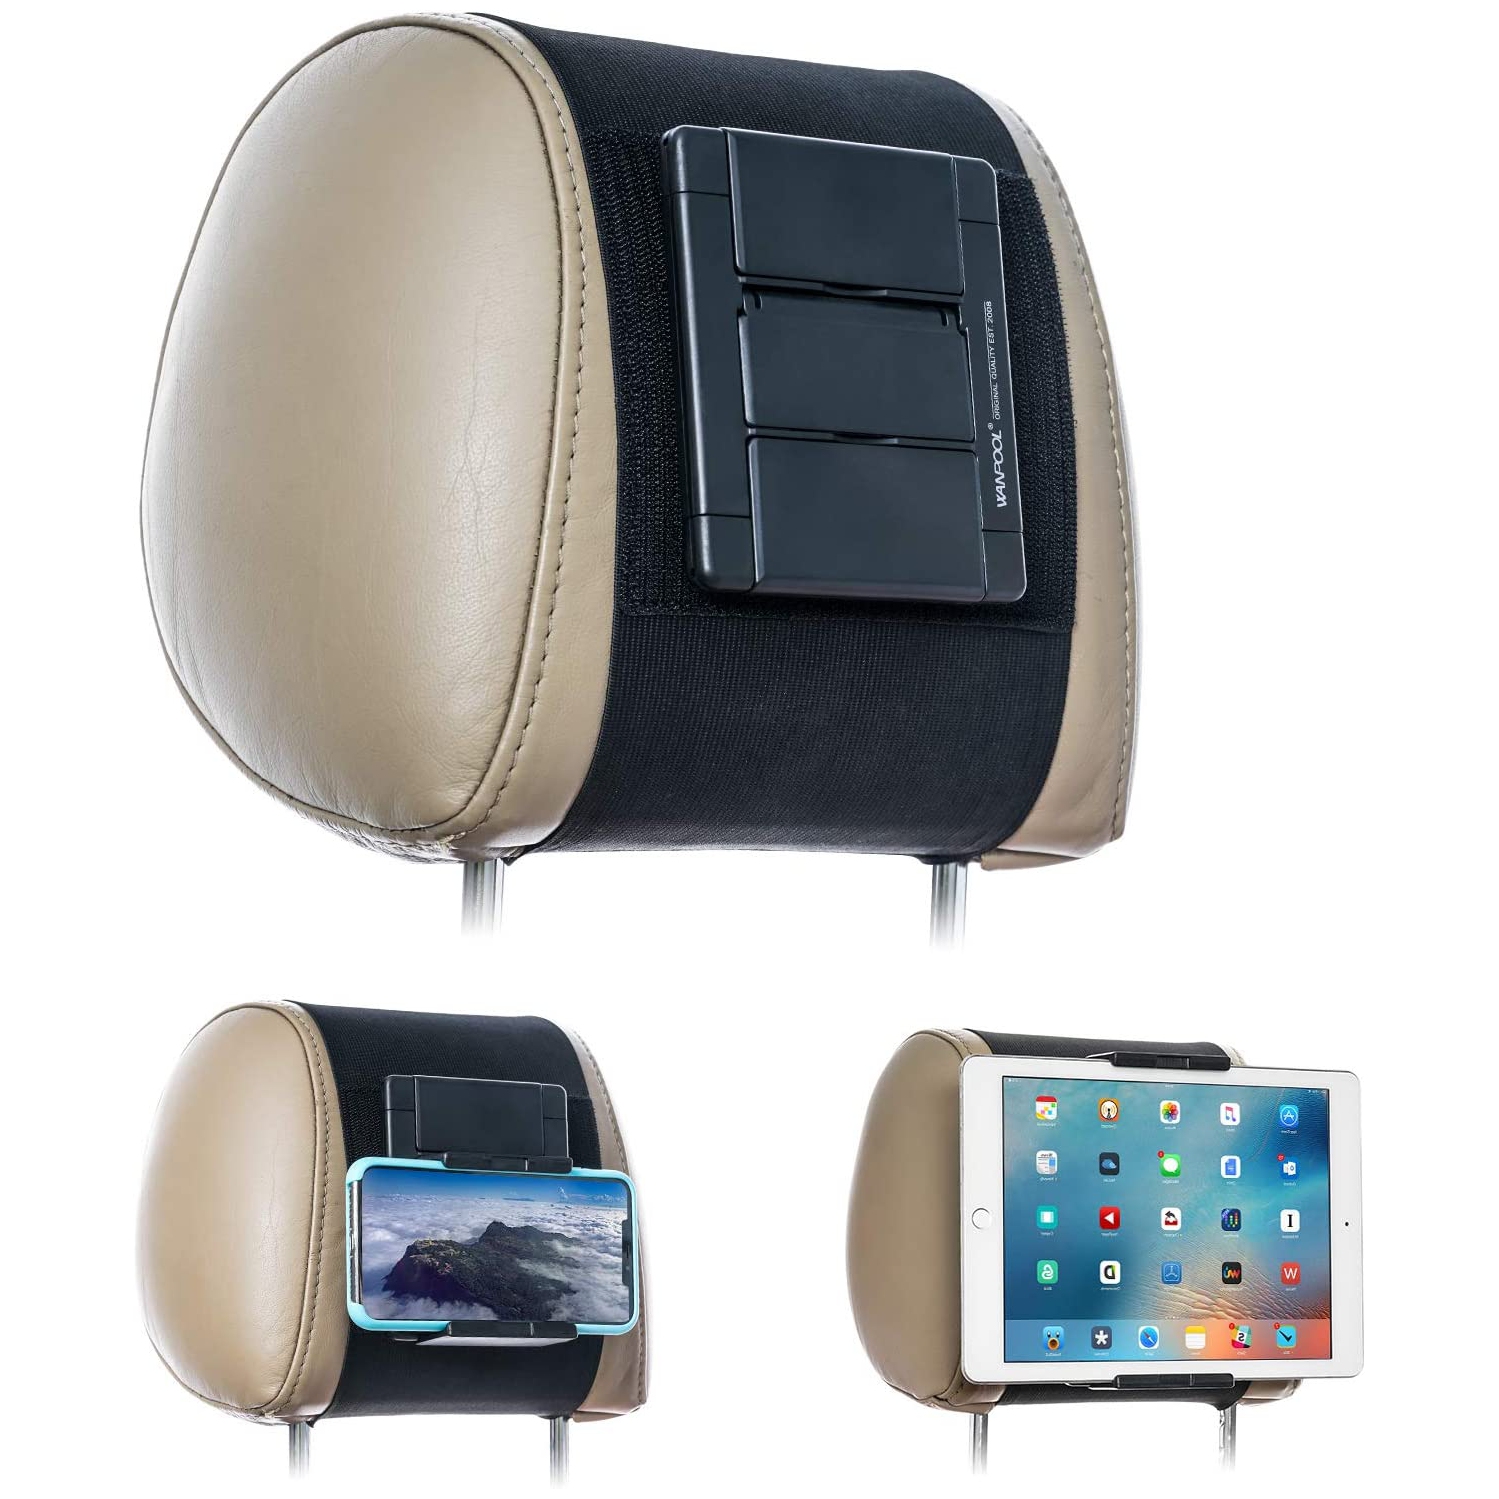 Car Headrest Mount Holder for Tablets and Phones with 5-10.5' Screens -Apple iPhone iPad Air Mini, Samsung Galaxy, Nintendo Switch